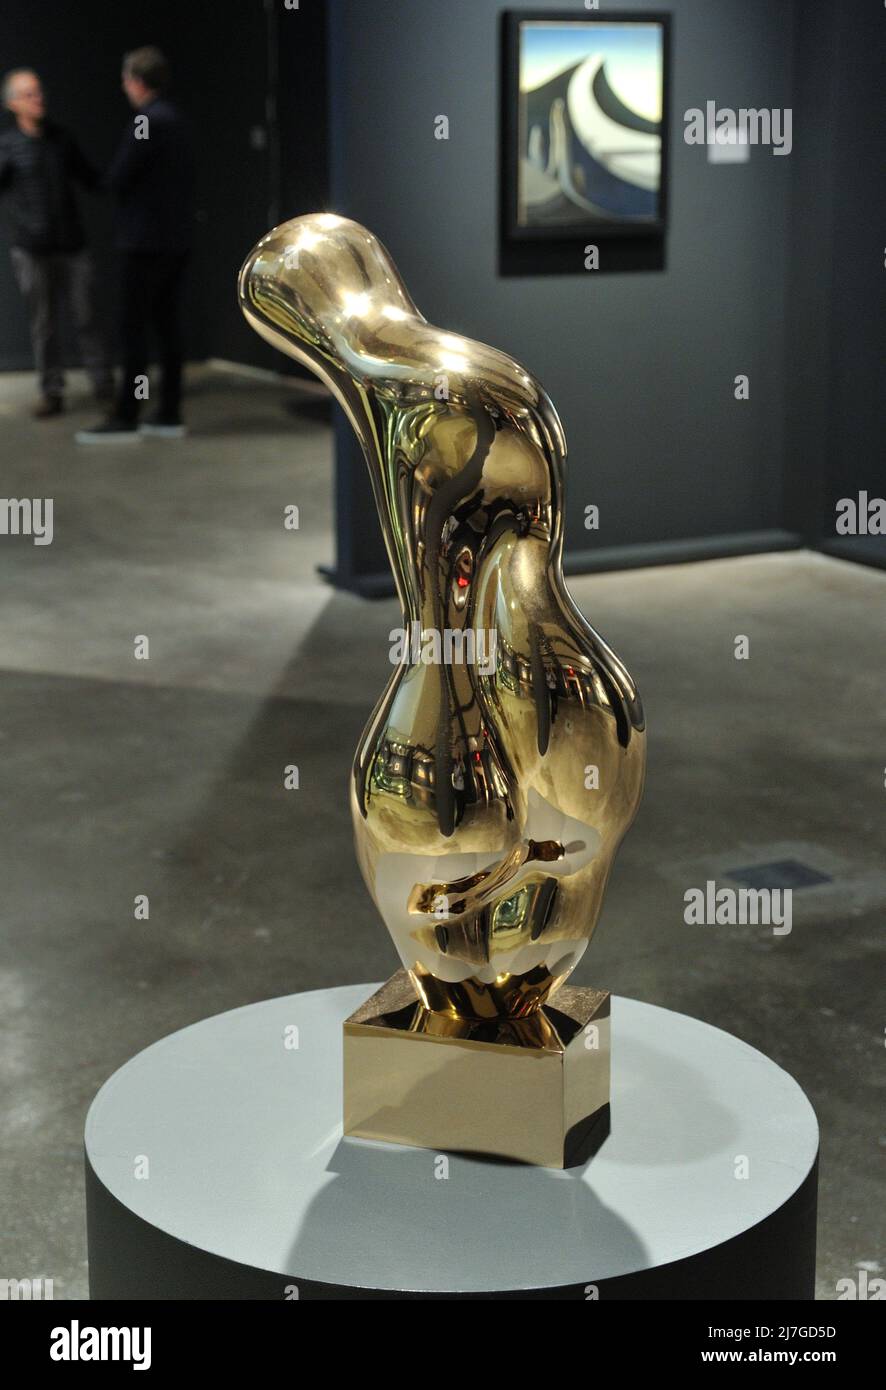 New York, USA. 06th May, 2022. Torse-Gerbe by Jean Arp on display at  Sotheby's as part of "The New York Sales" art auctions held in New York, NY  on May 6, 2022. (